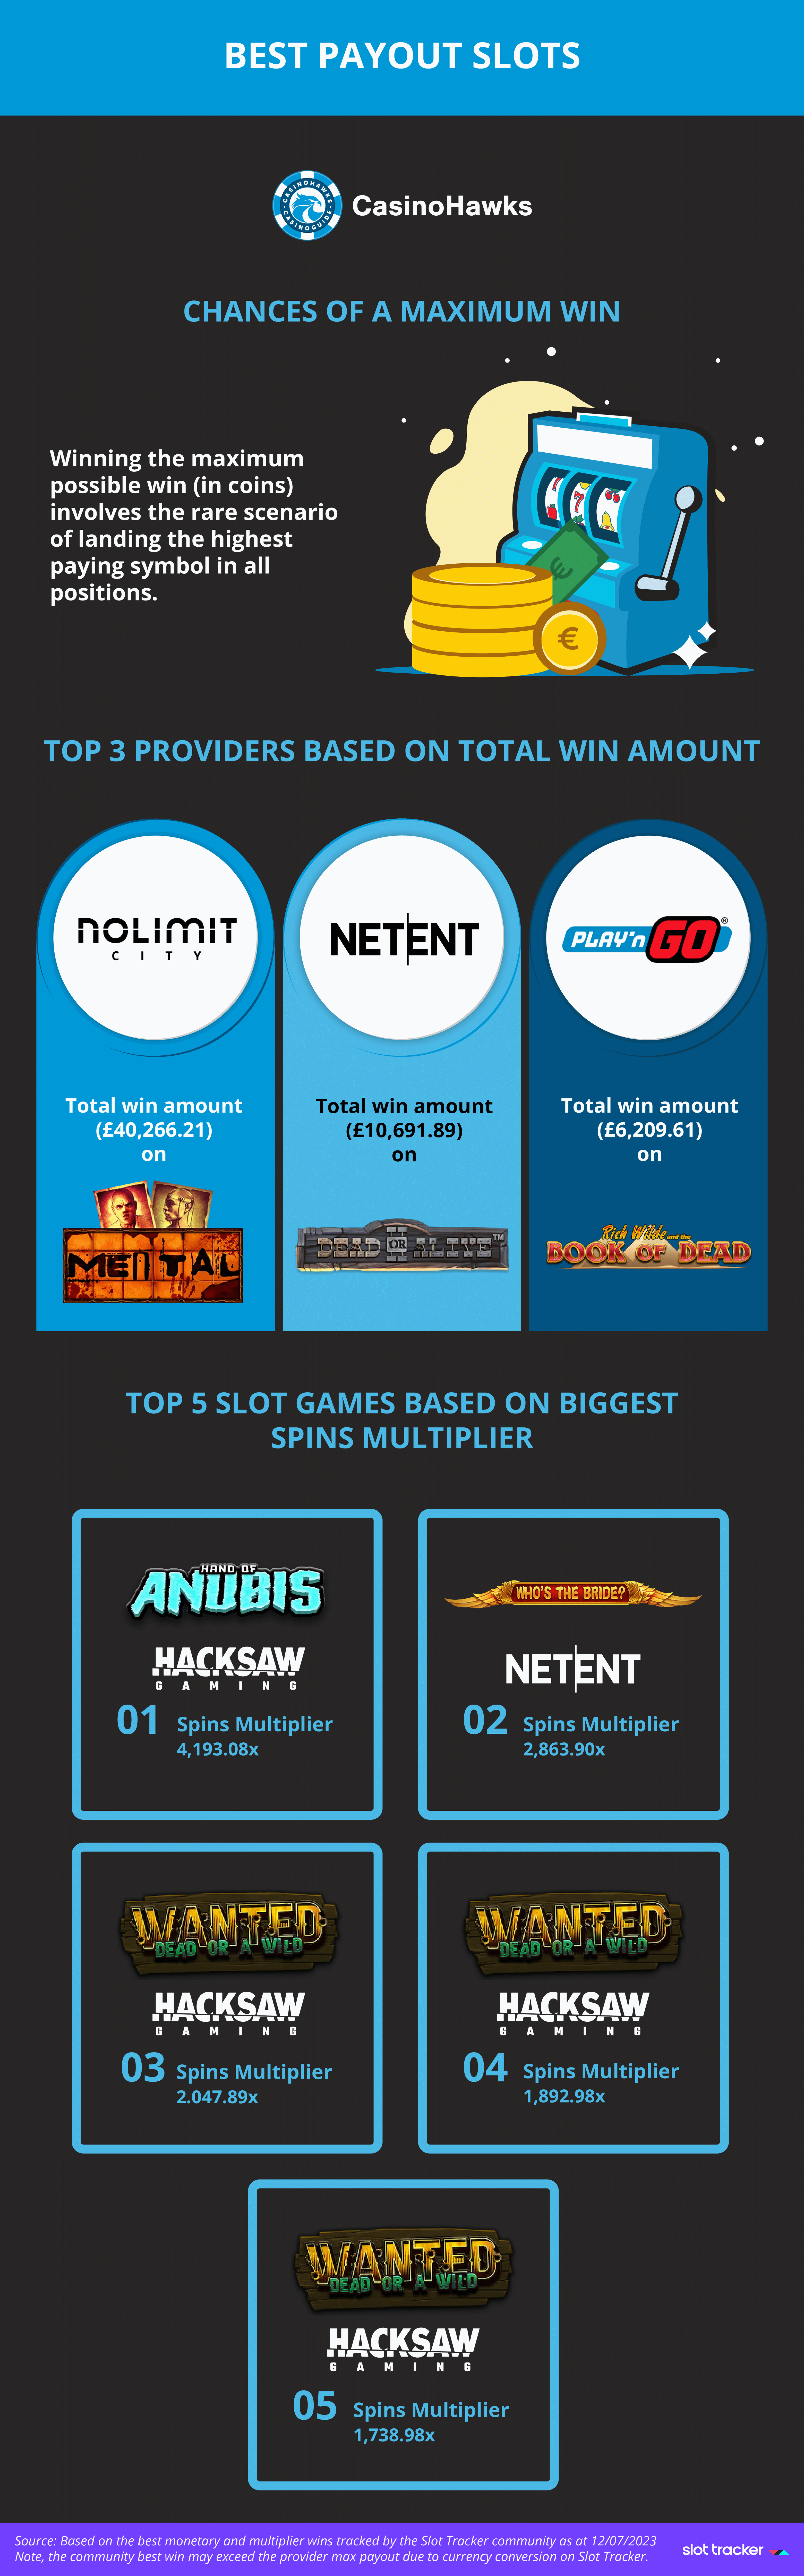 best payout slots infographic